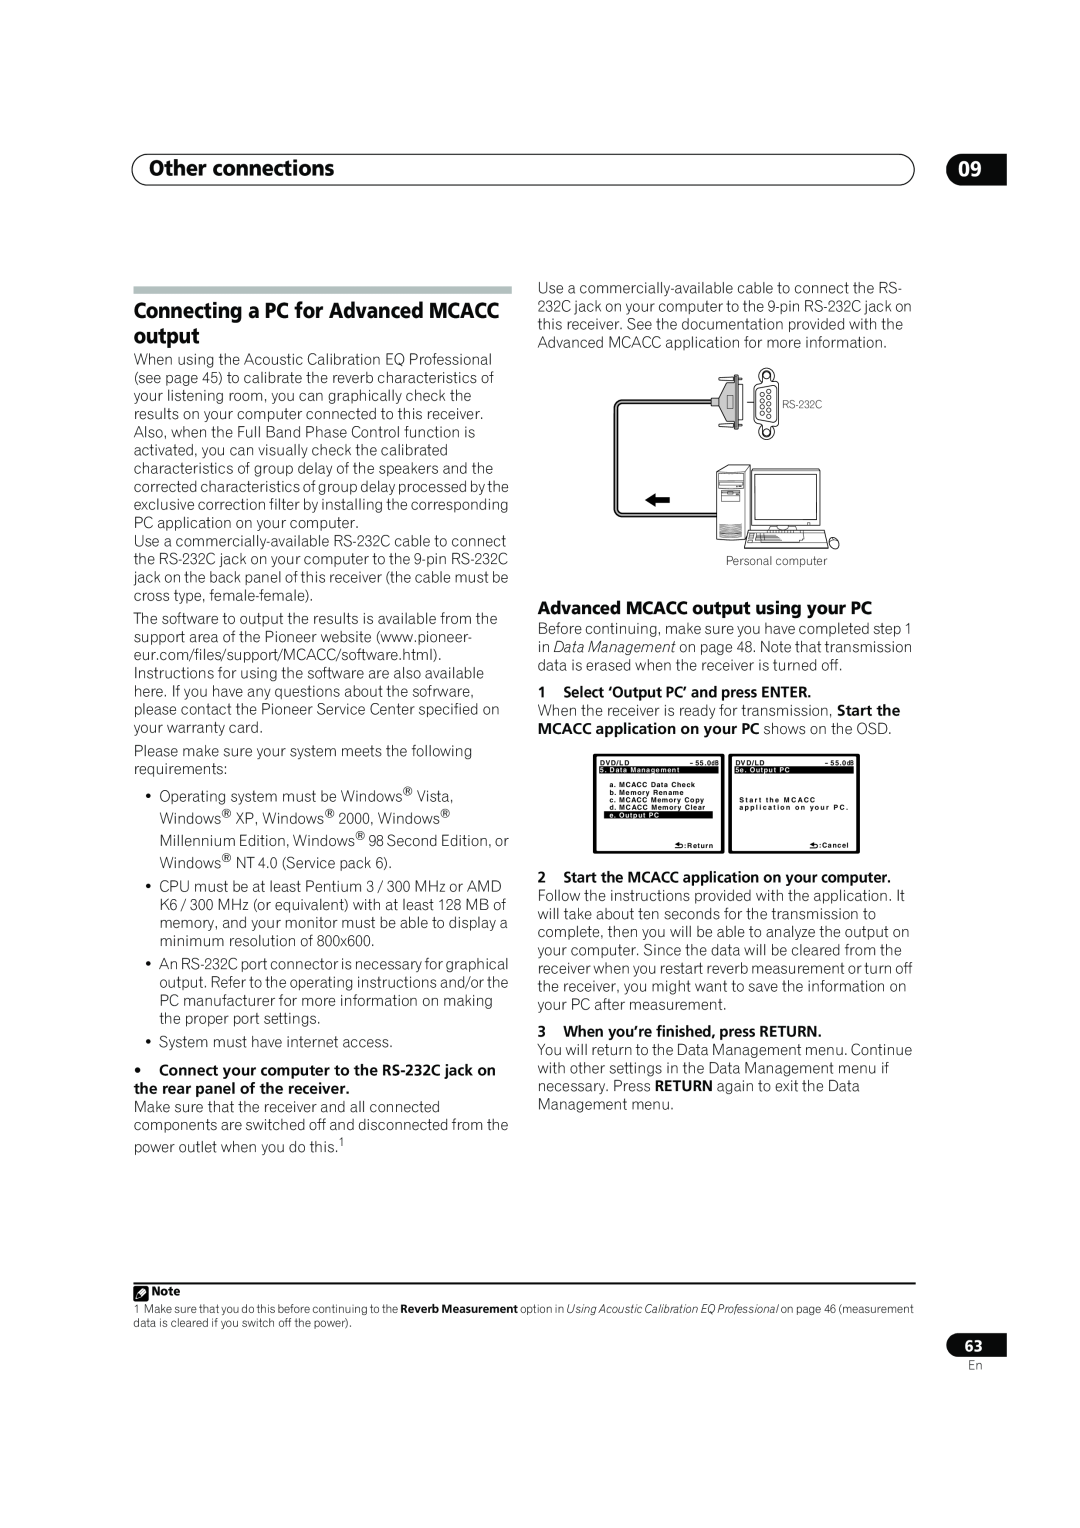 Pioneer VSX-LX60 Connecting a PC for Advanced MCACC output, Advanced MCACC output using your PC, Other connections 